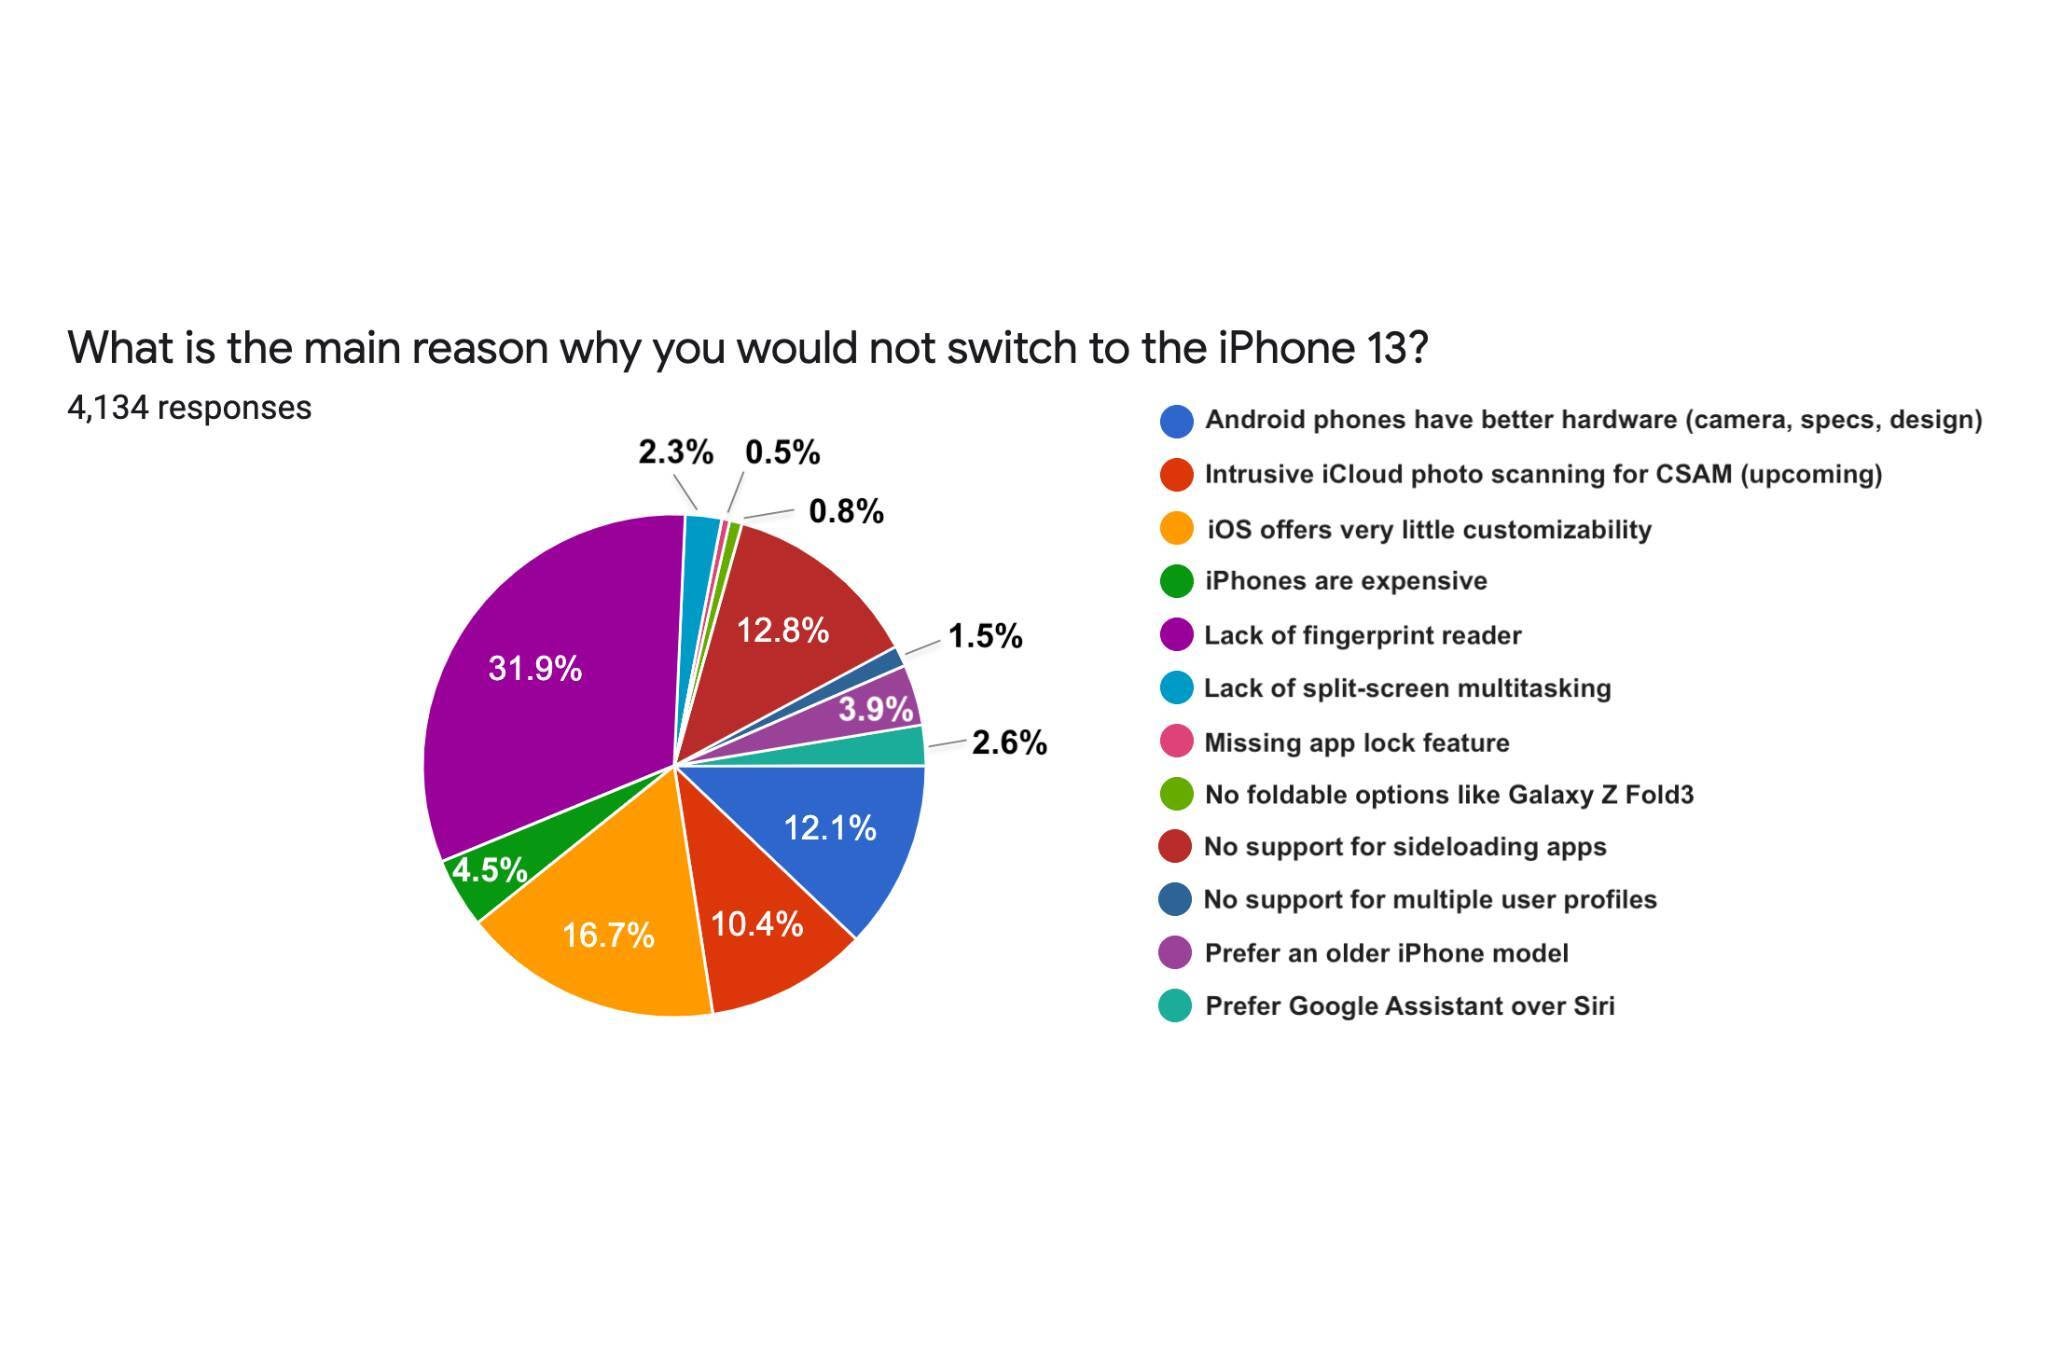 Android users' top reasons for not buying iPhone 13 - 82% of Android users not interested in iPhone 13, chiefly because of no Touch ID and iOS restrictions